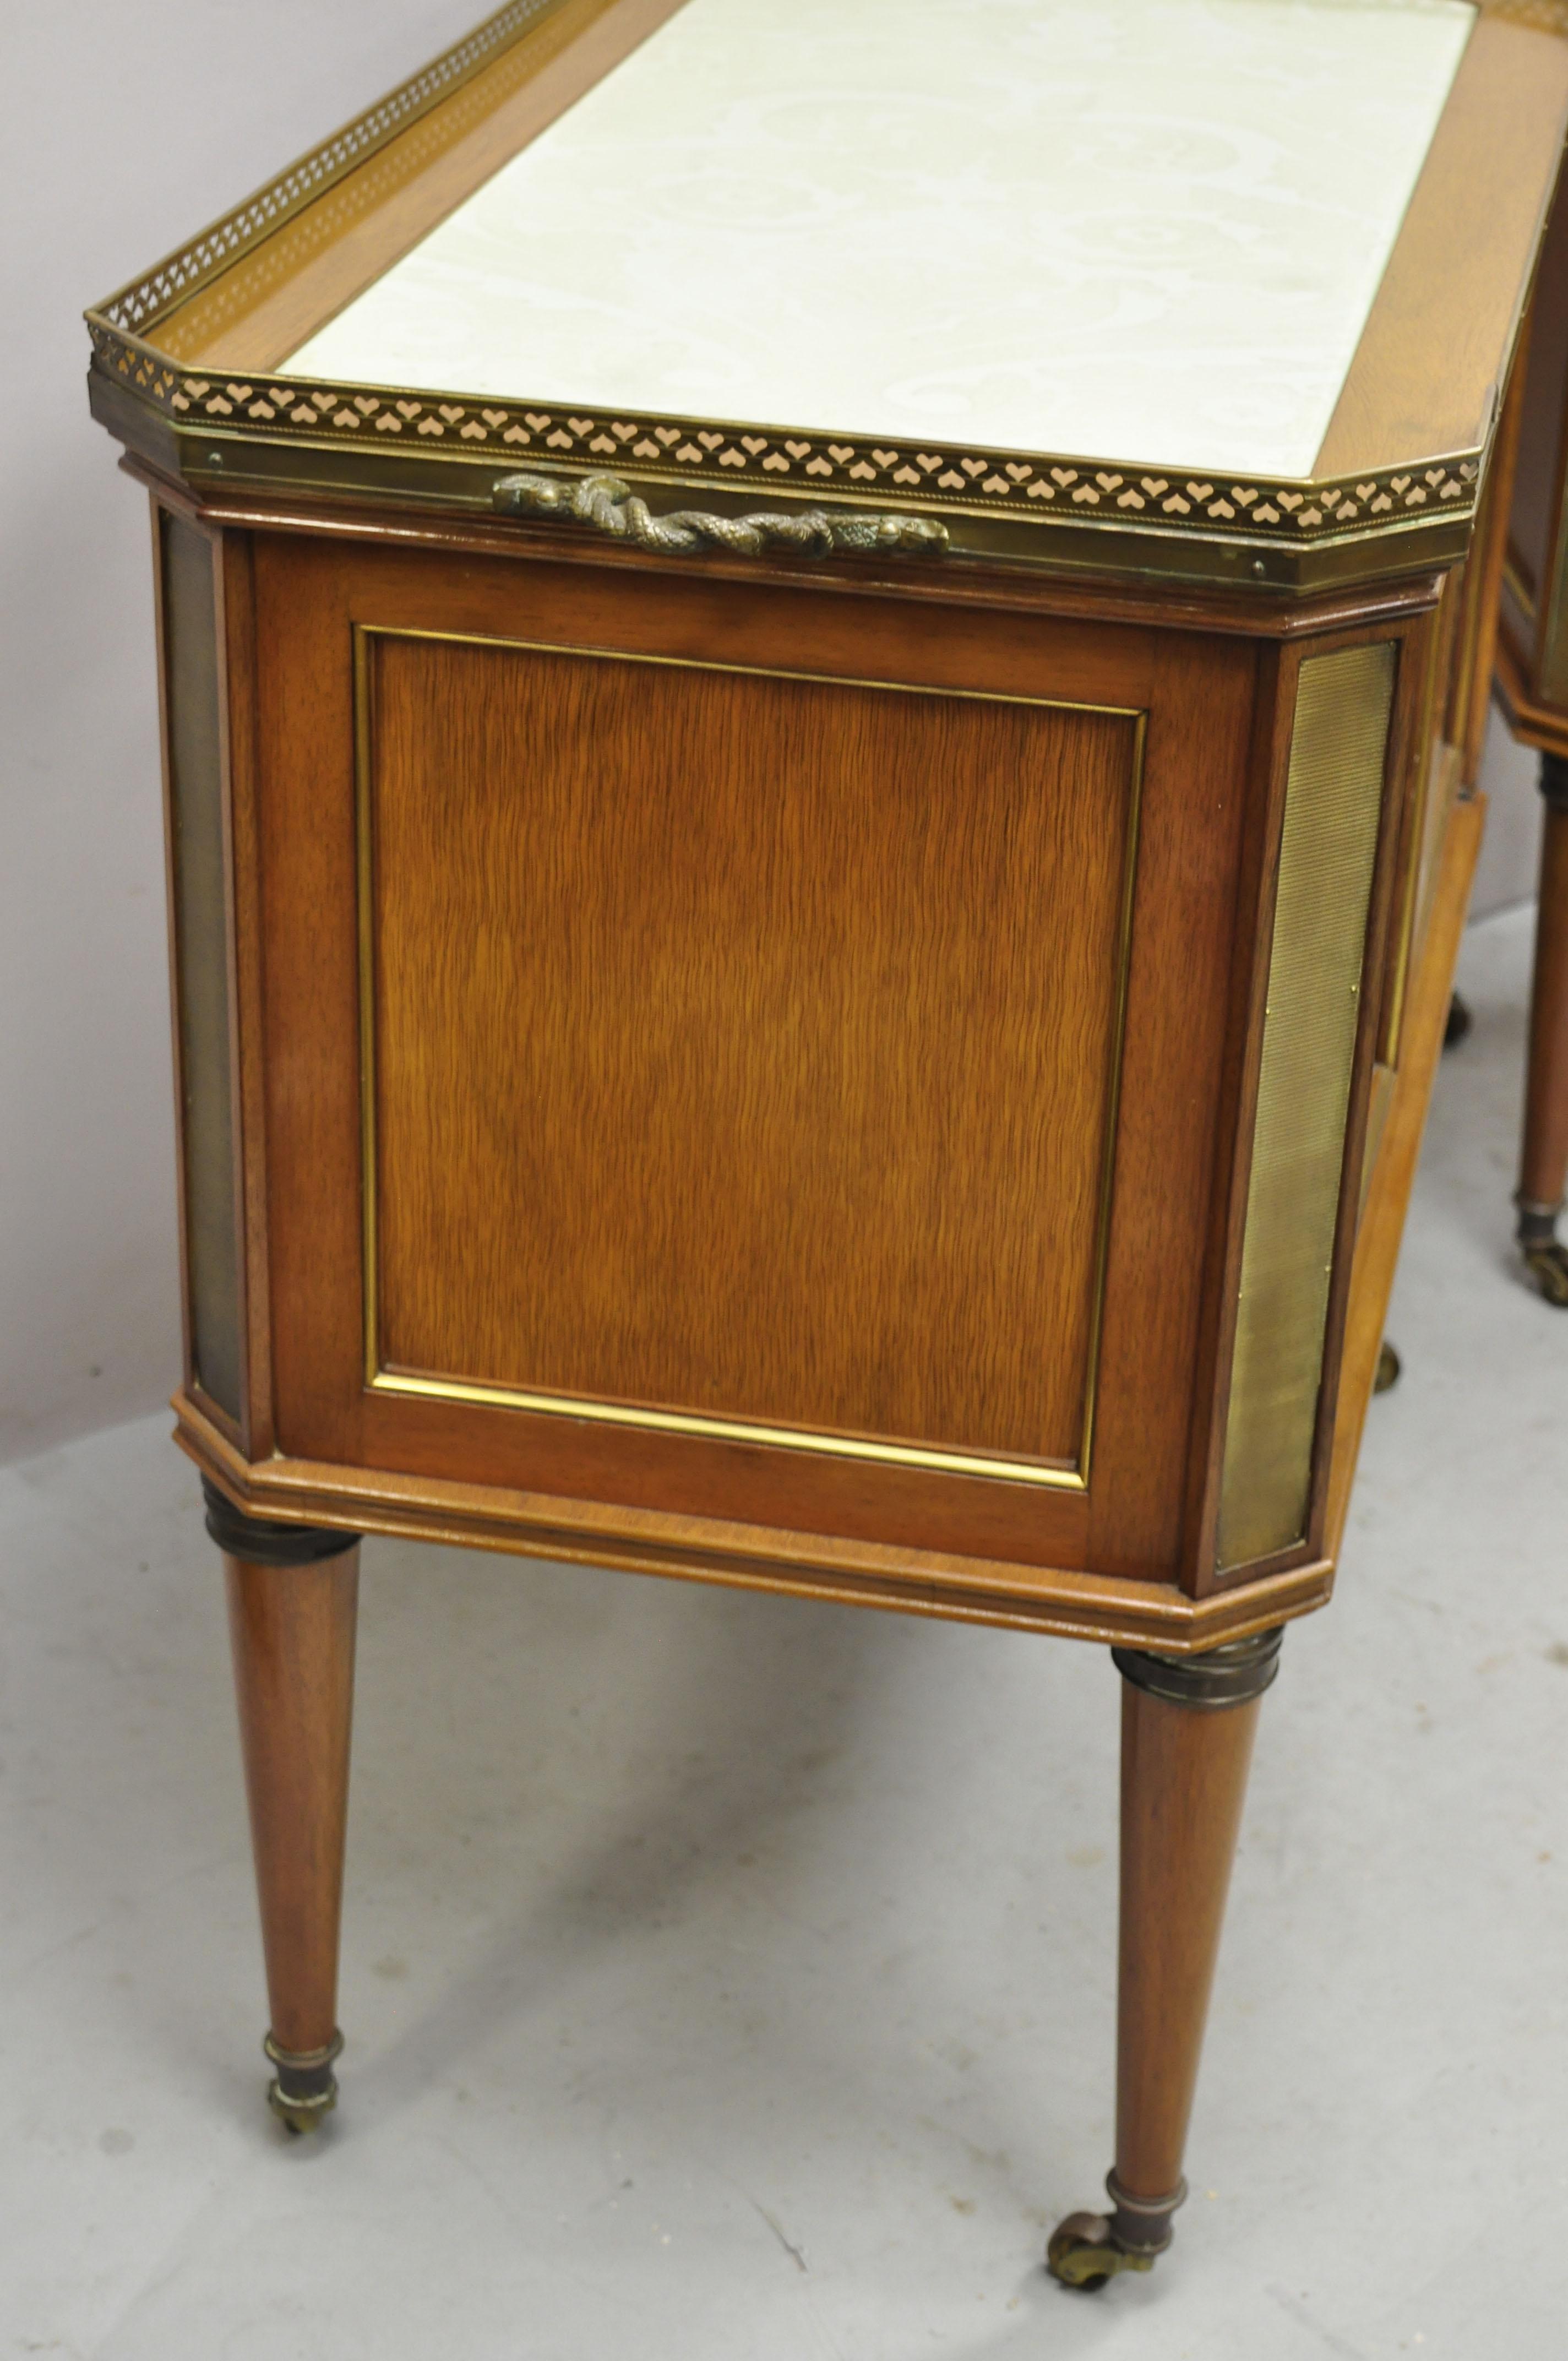 French Louis XVI Neoclassical Regency Mahogany Server Cabinet Tables, a Pair For Sale 6